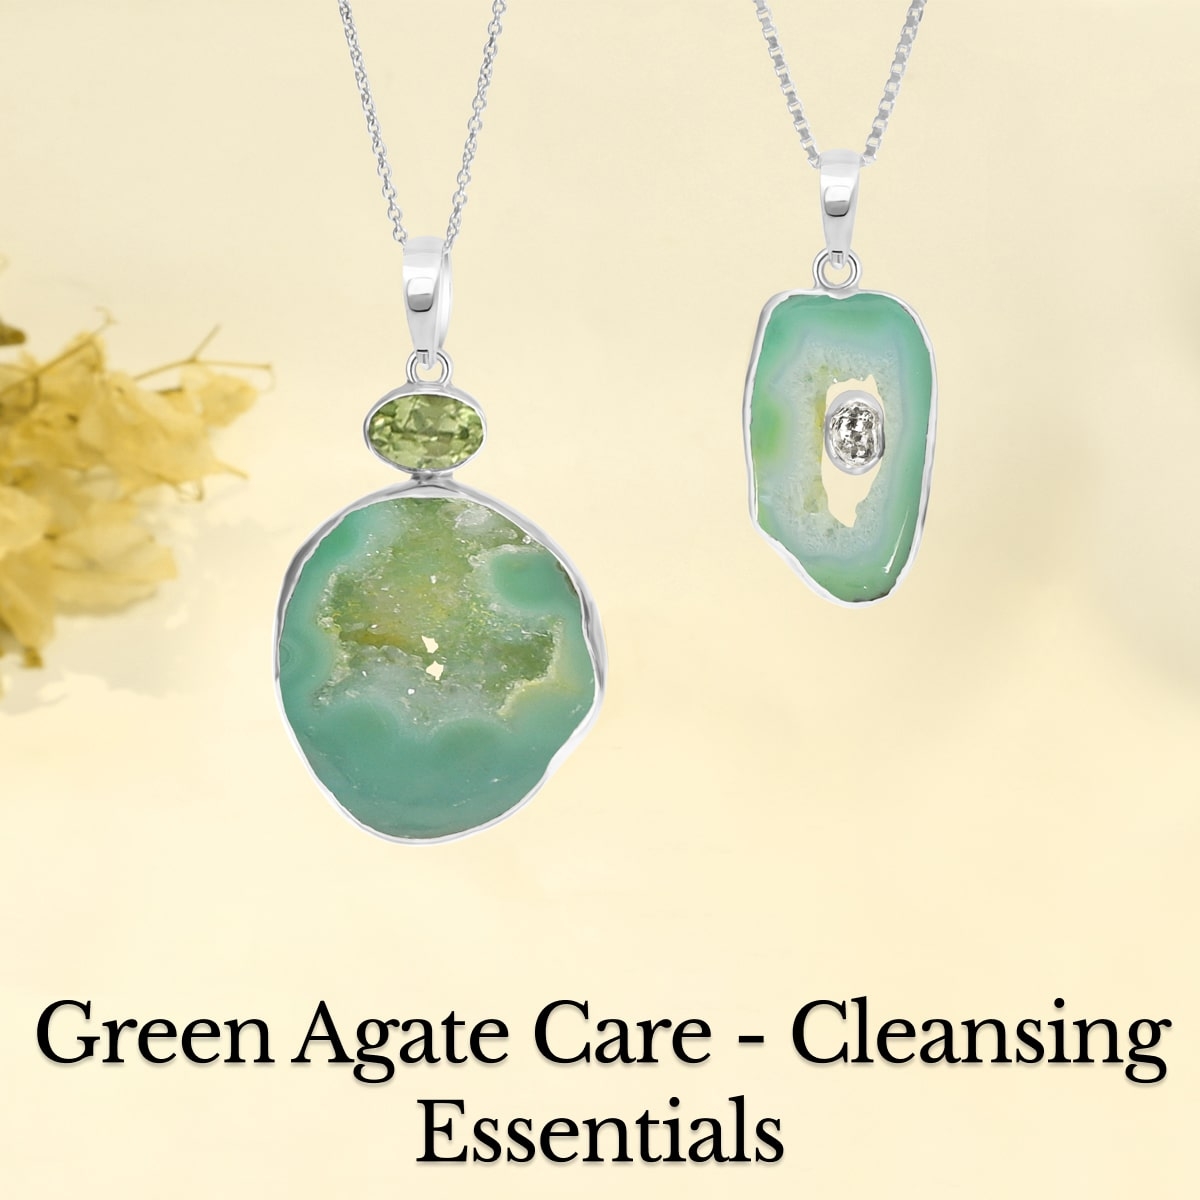 How to Cleanse Green Agate